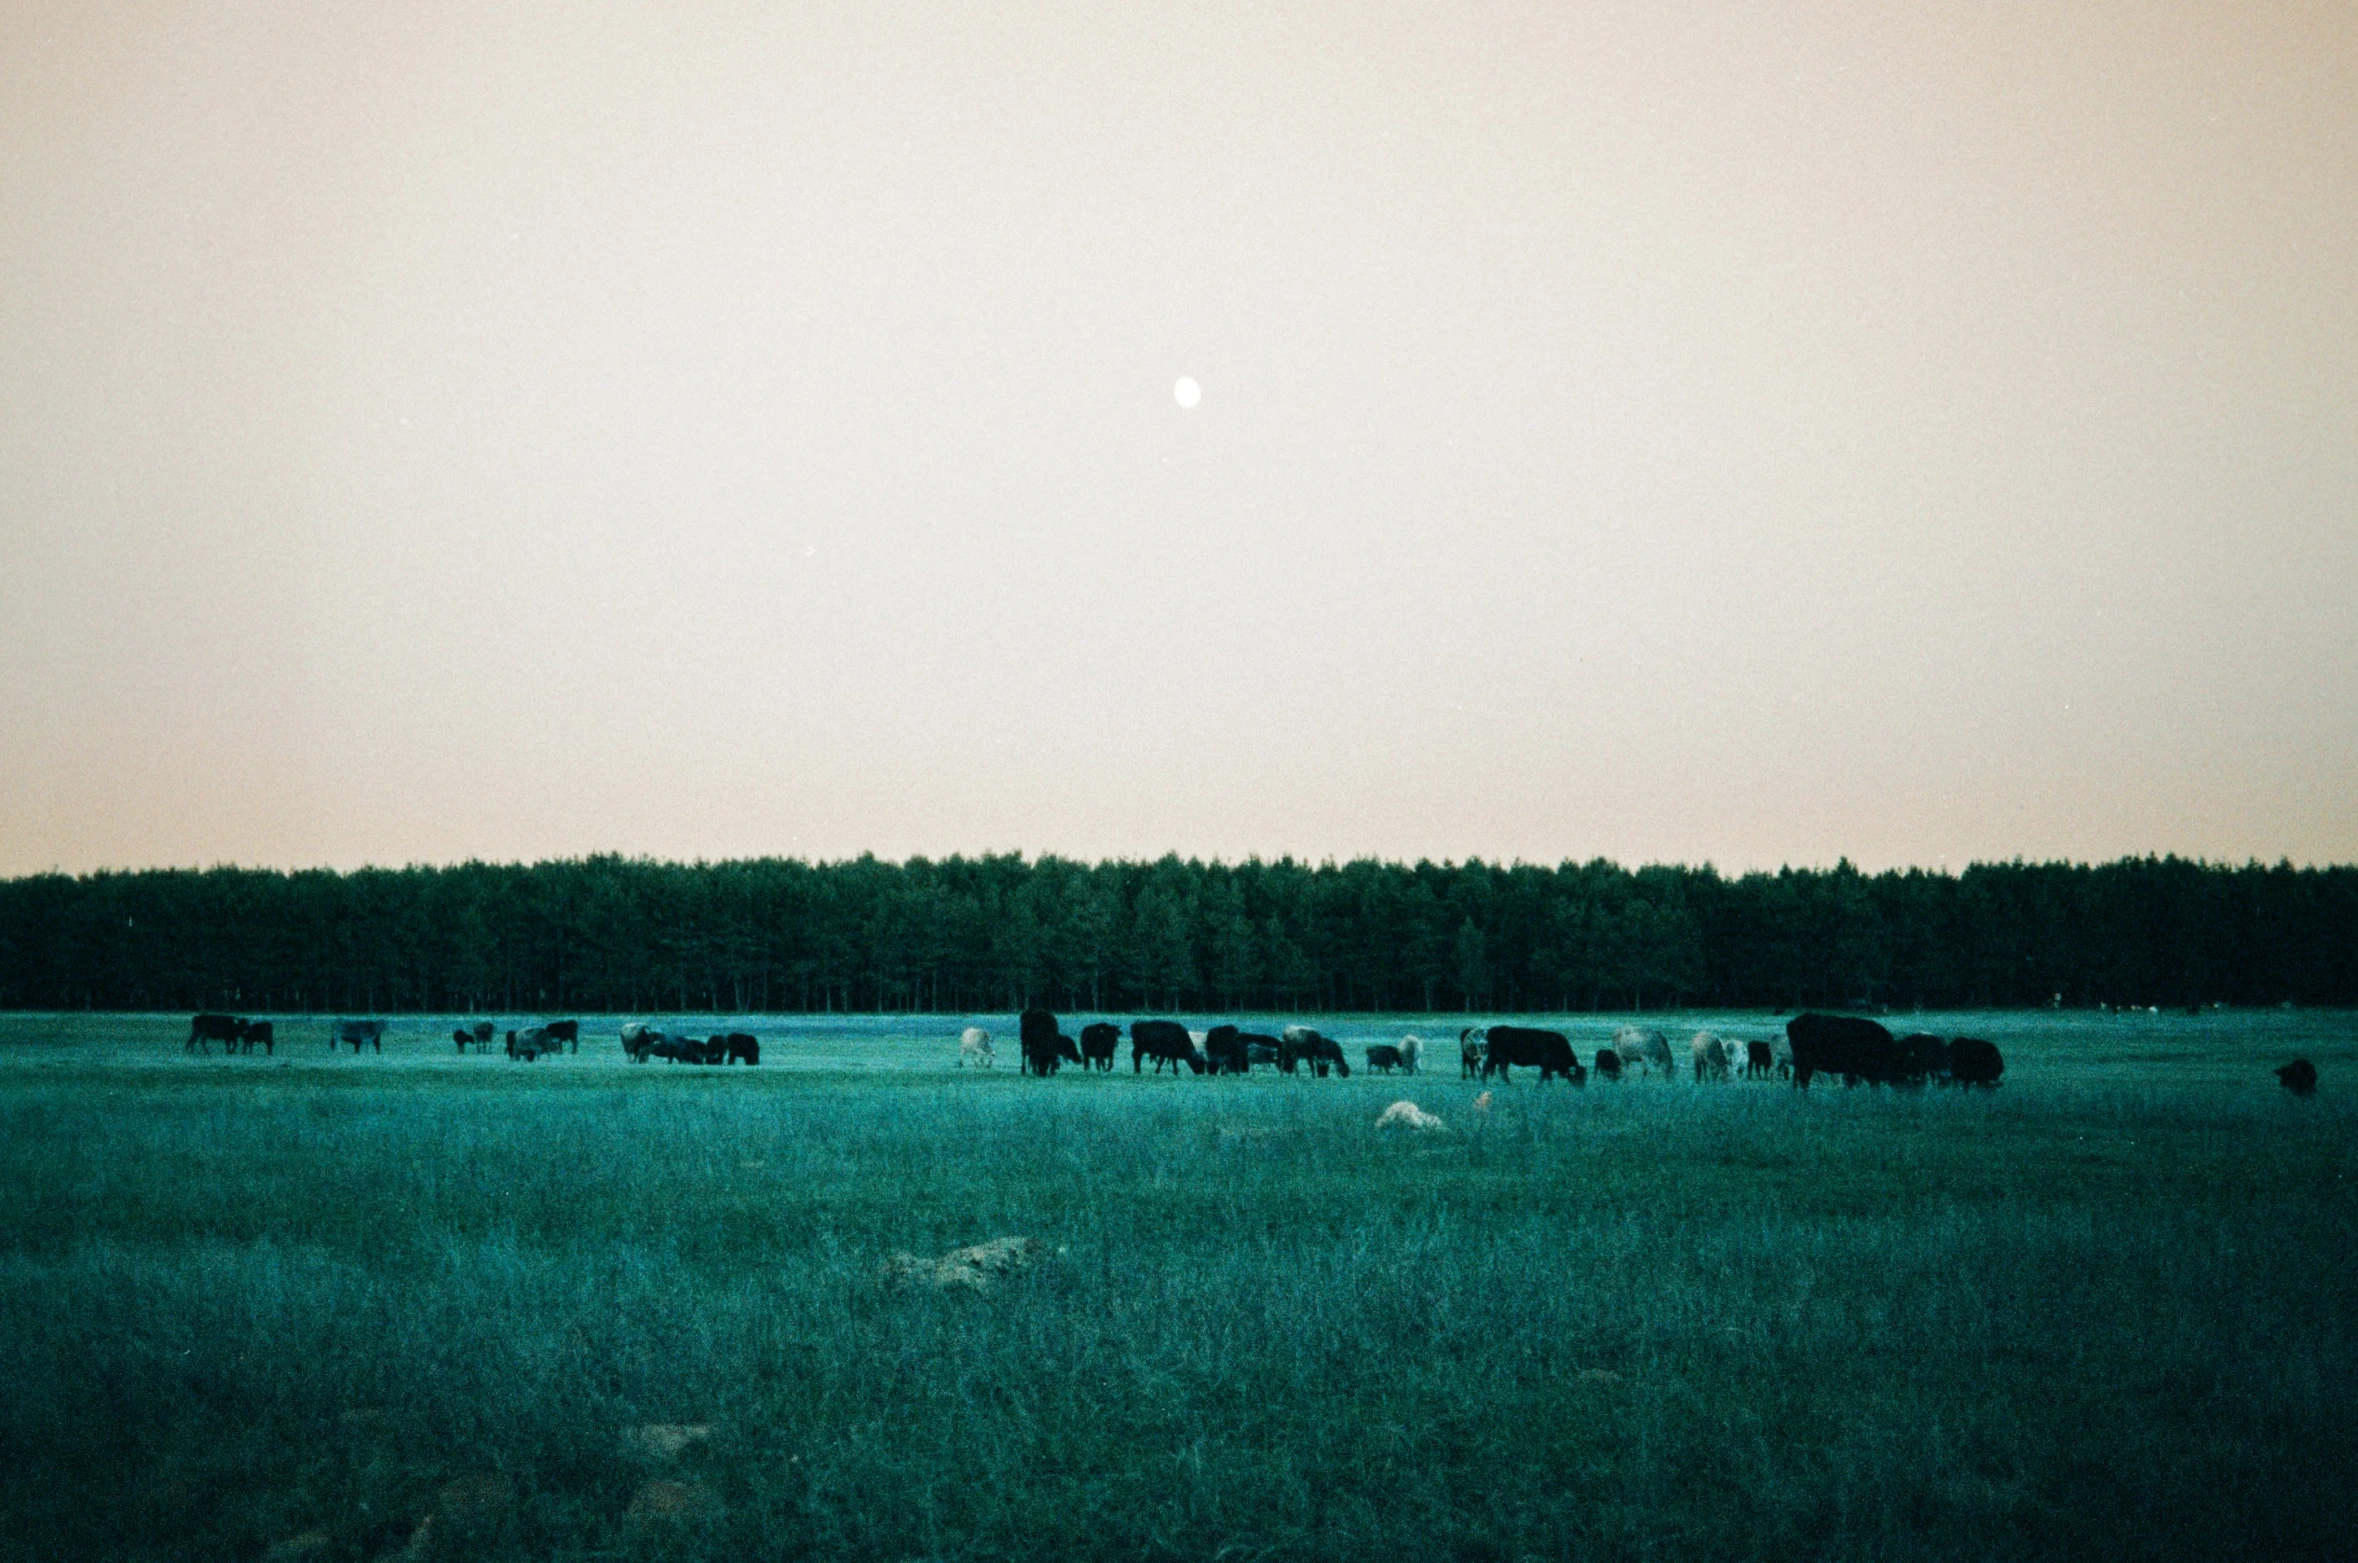 horses are grazing in the middle of a field